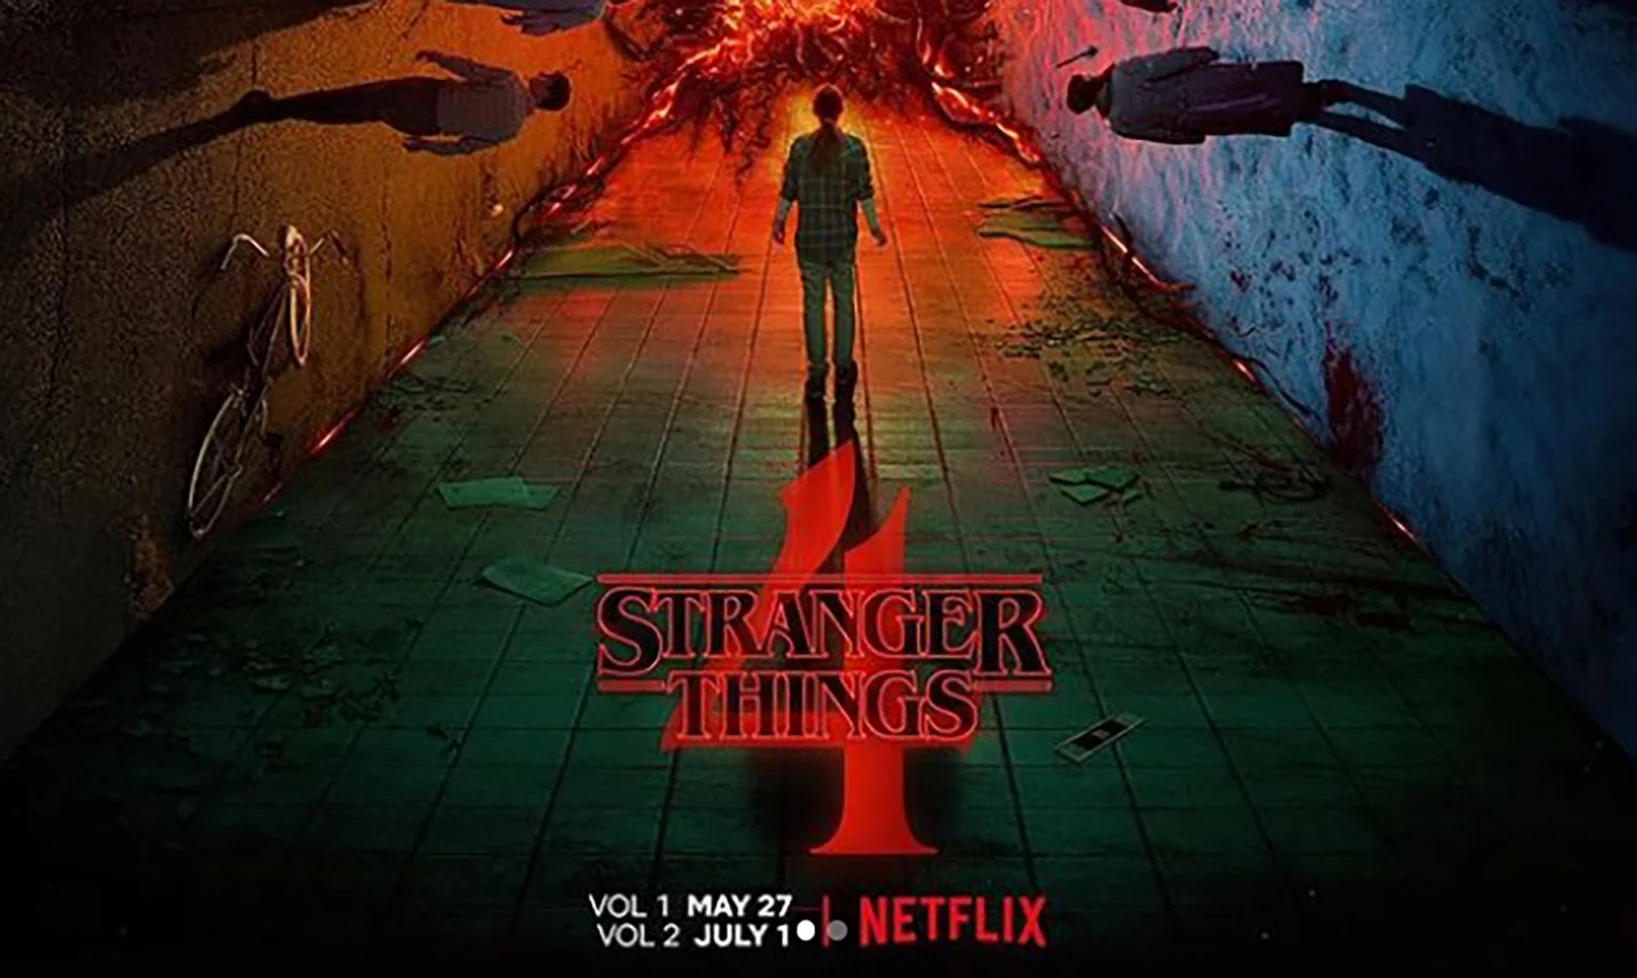 Netflix Stranger Things 4, to take on a voyage of thrill on May 27, 2022